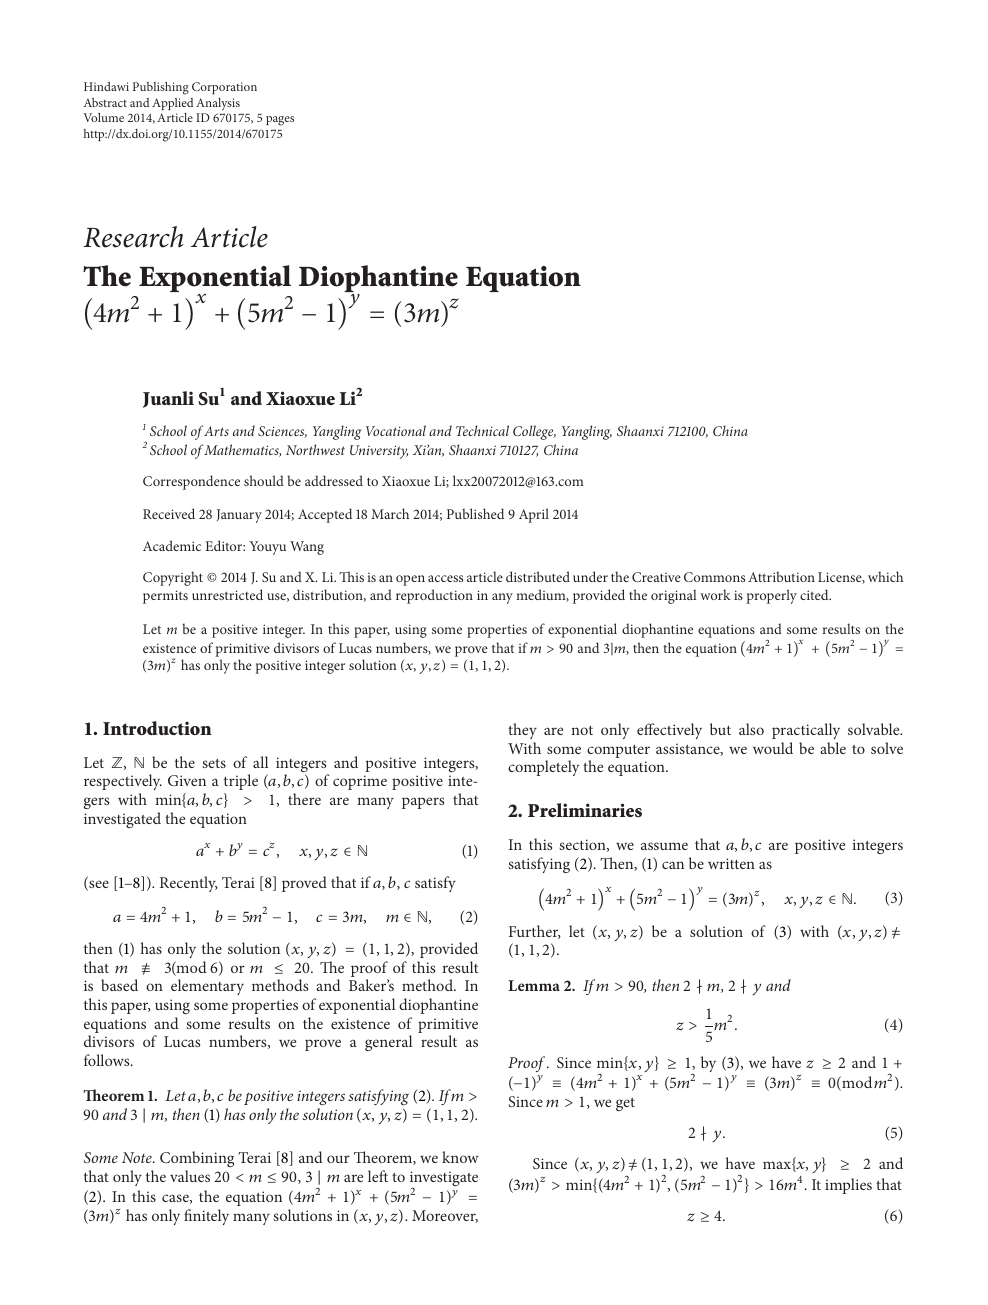 The Exponential Diophantine Equation 4 M 2 1 X 5 M 2 1 Y 3 M Z Topic Of Research Paper In Mathematics Download Scholarly Article Pdf And Read For Free On Cyberleninka Open Science Hub